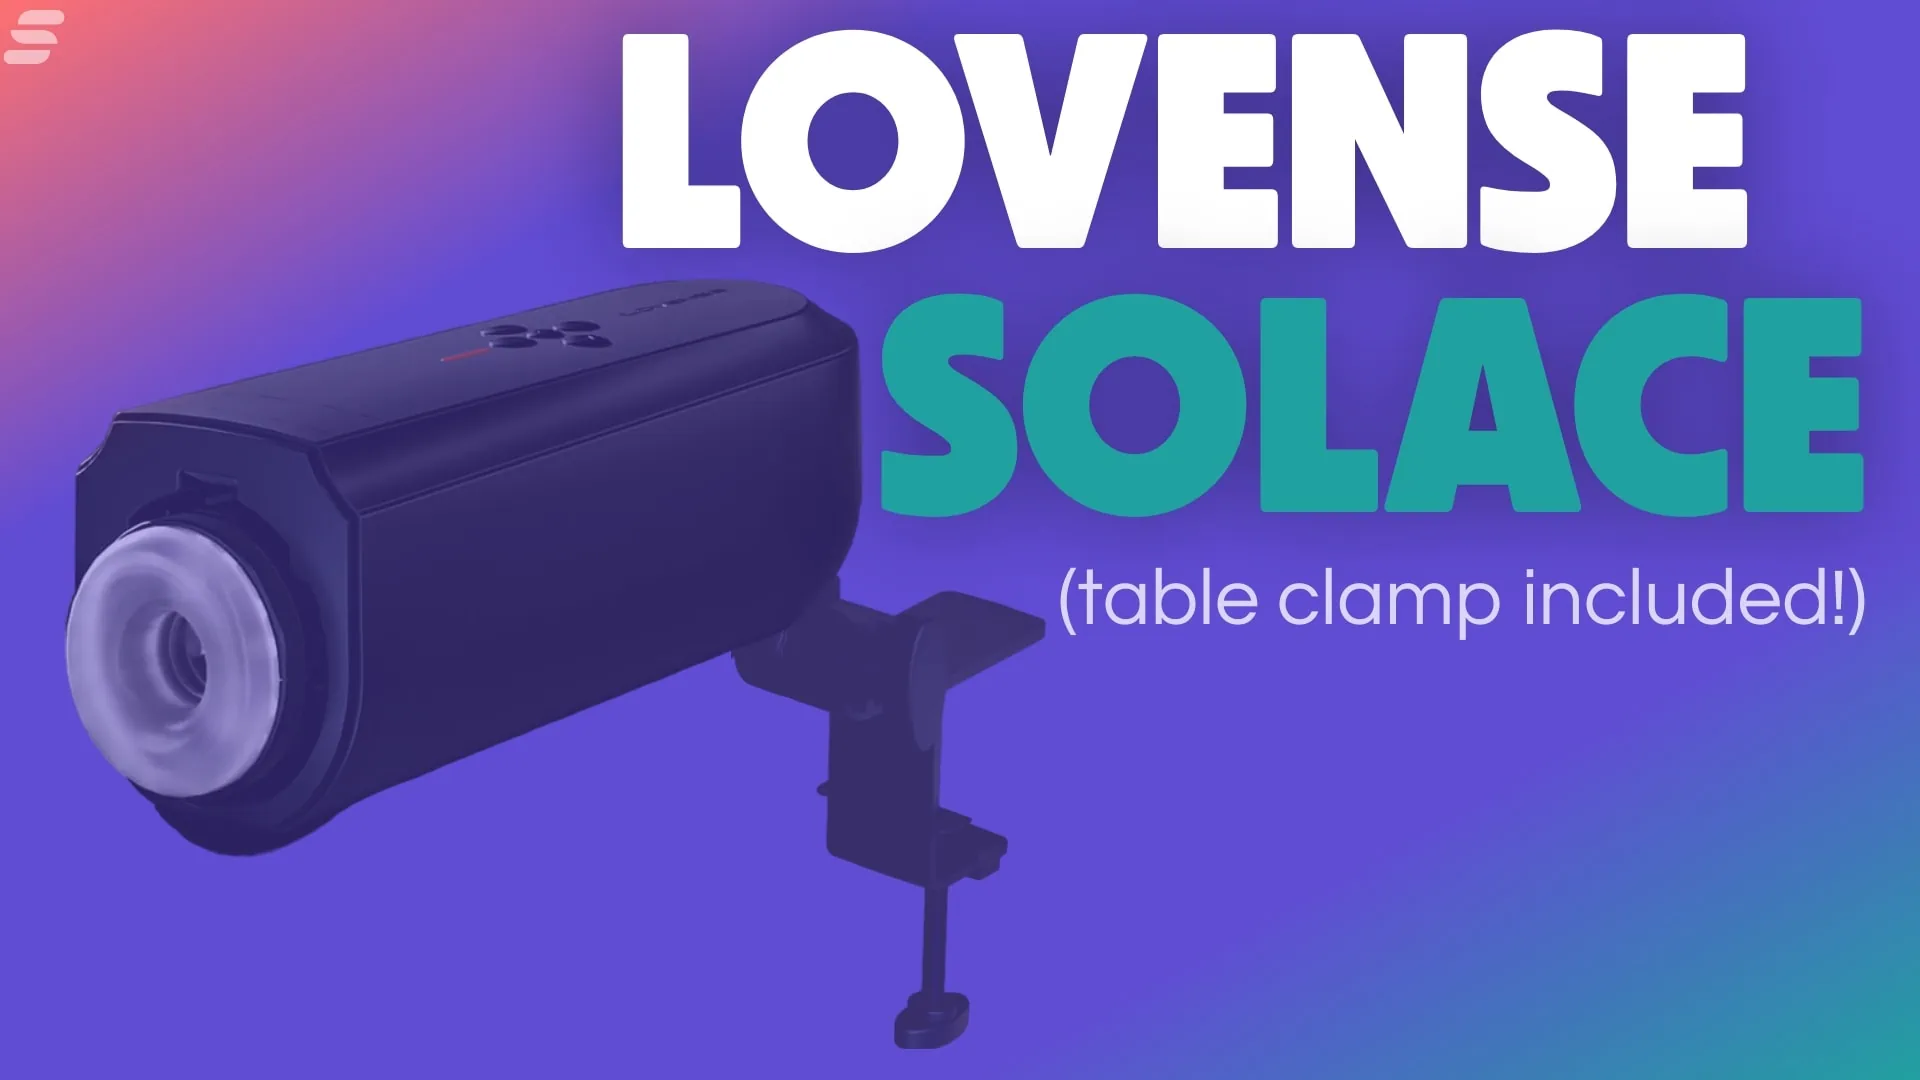 Lovense Solace Is An Interactive Stroker With A Table Clamp